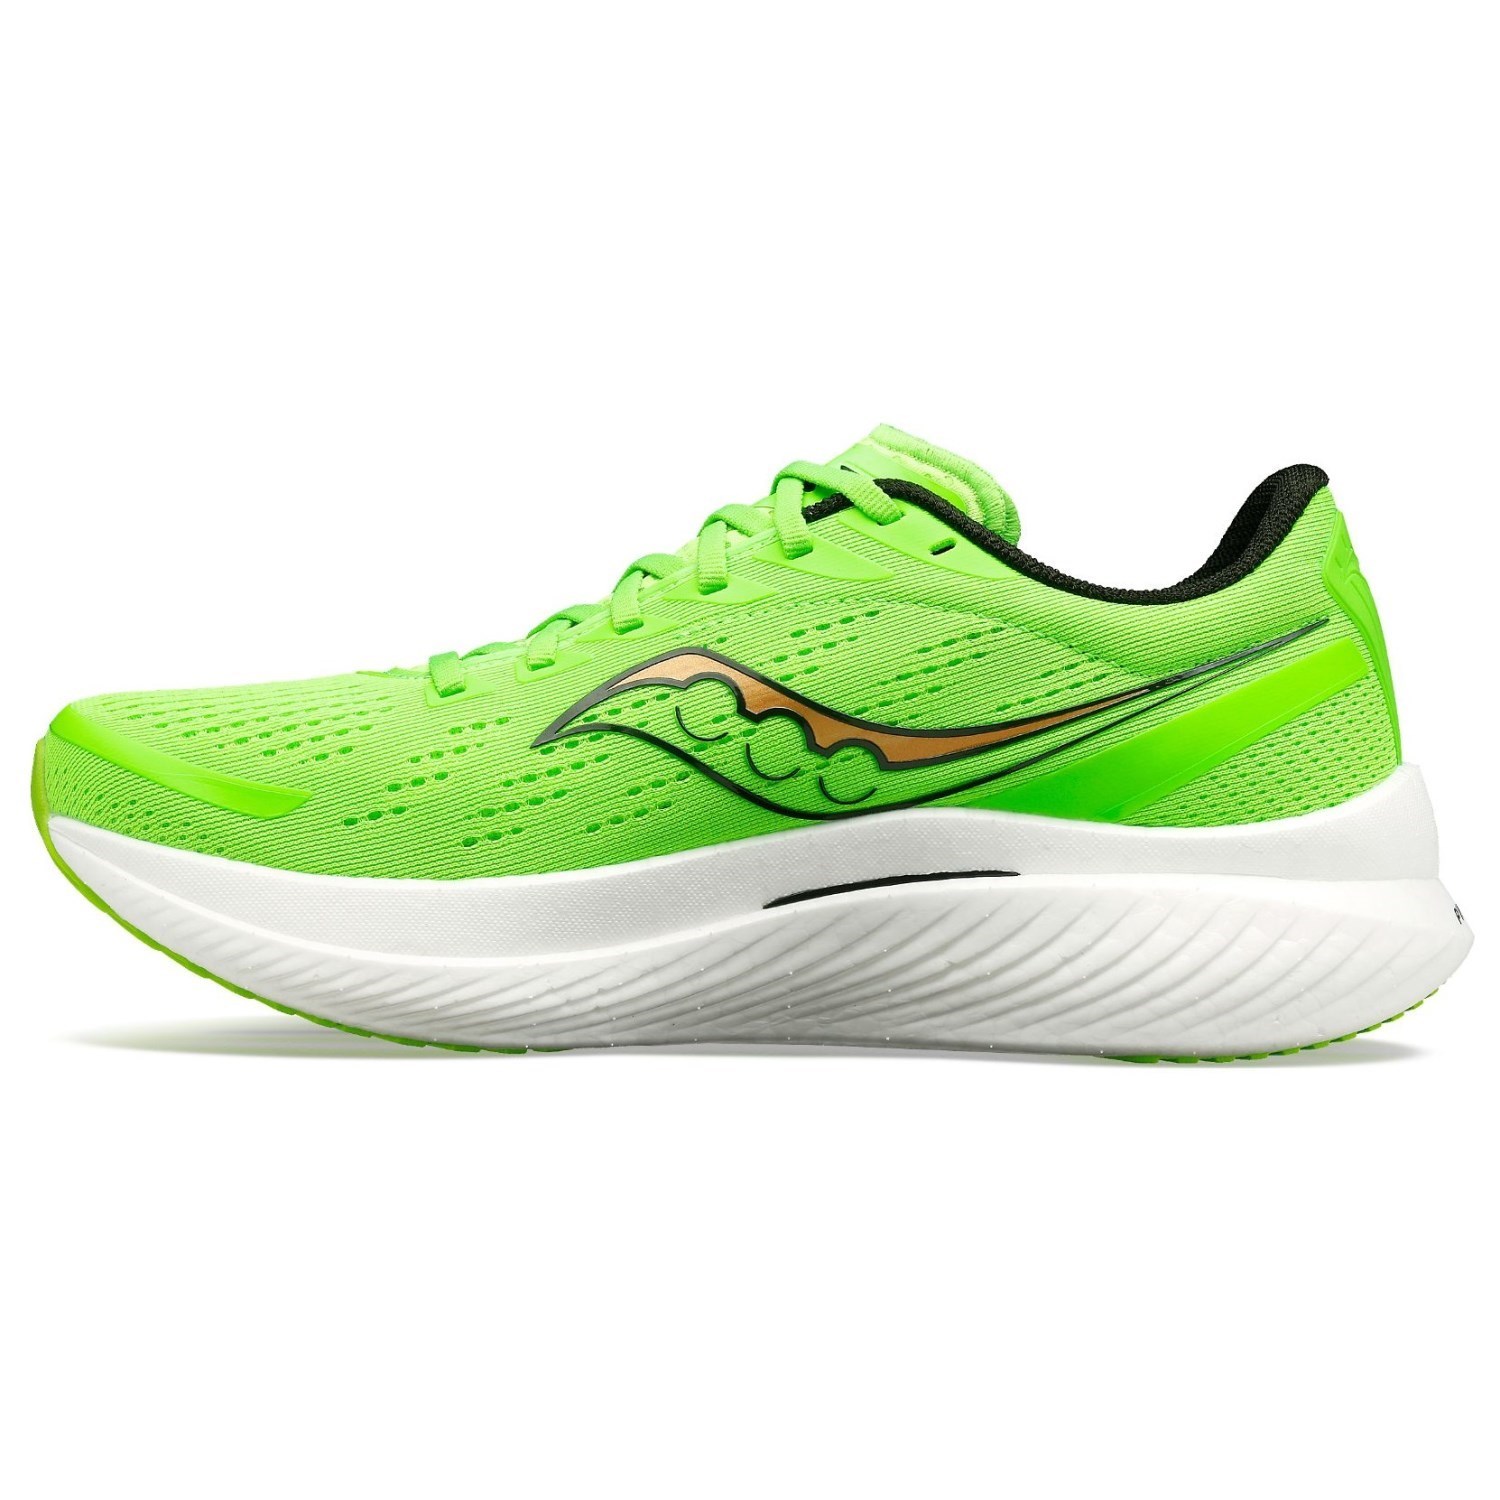 Saucony Endorphin Speed 3 - Mens Running Shoes - Slime/Gold | Sportitude